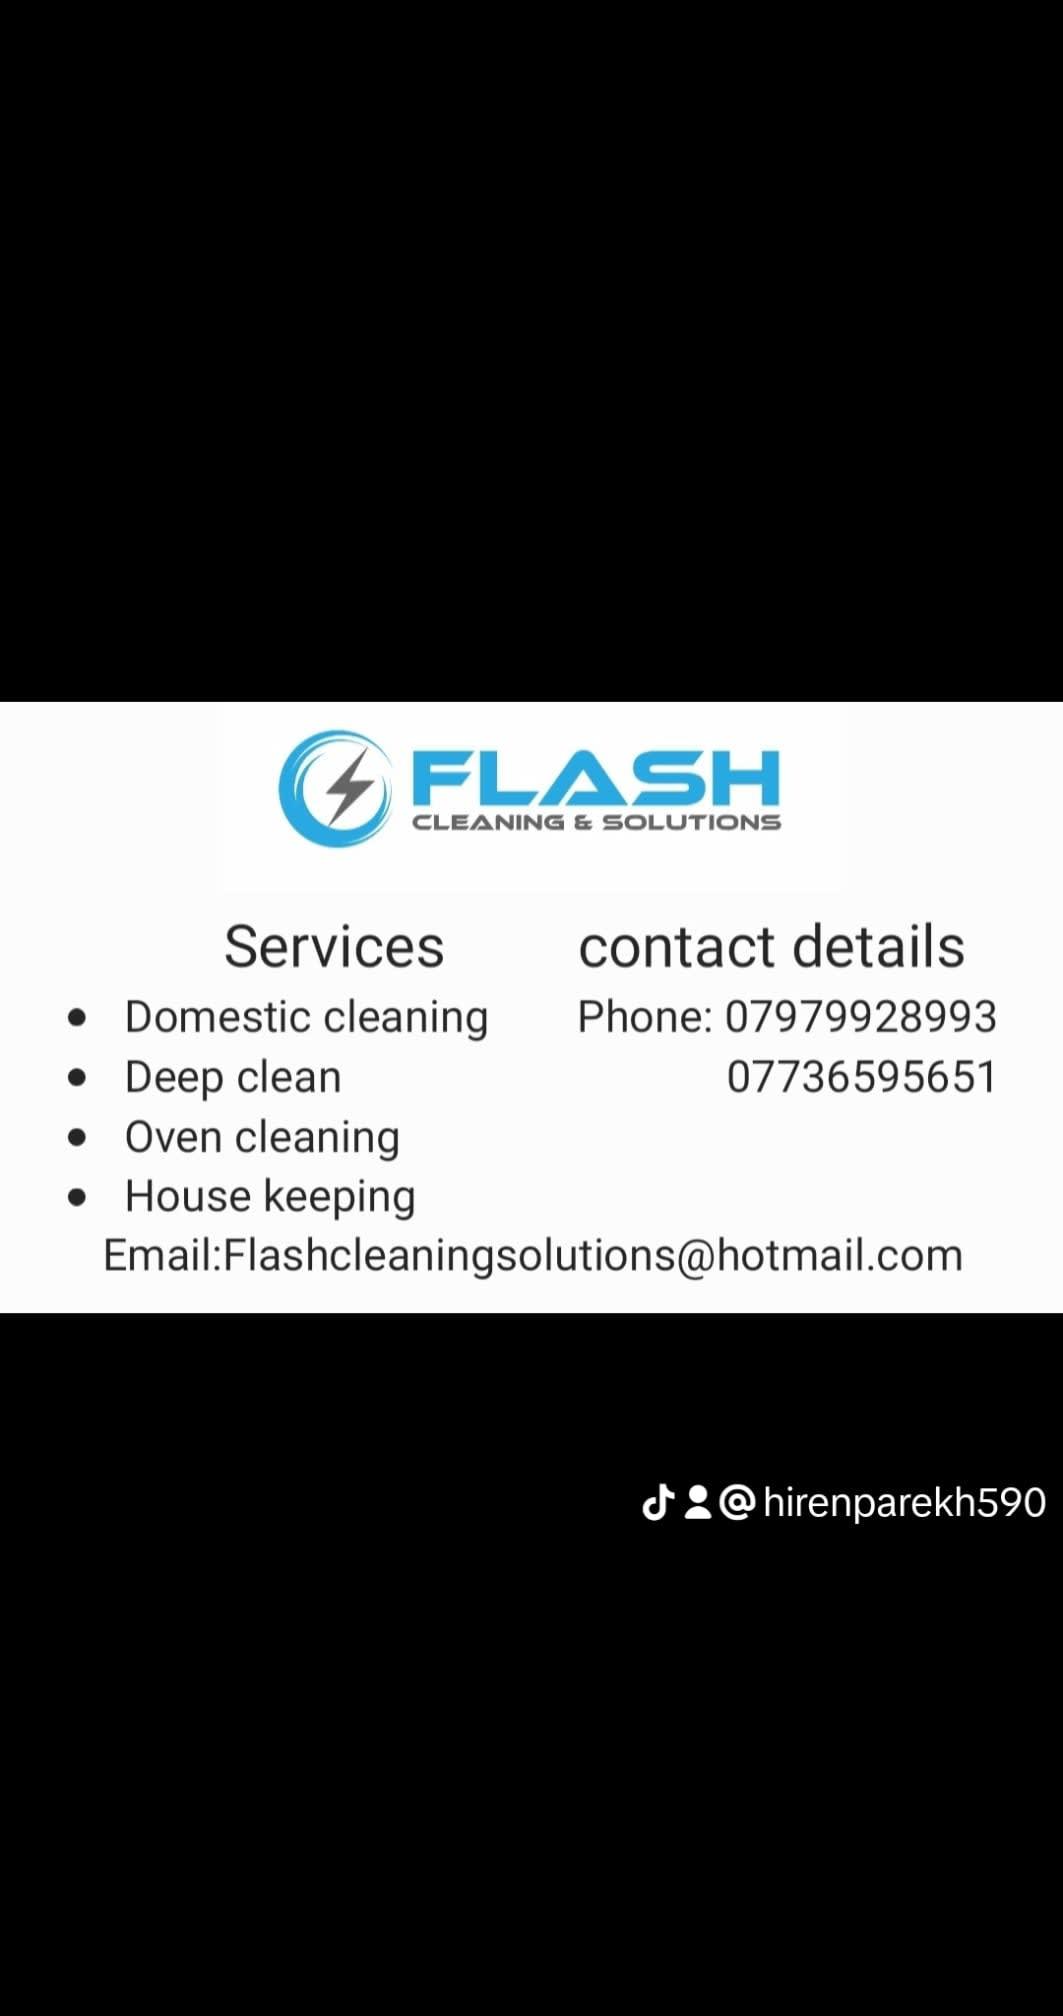 Flash Cleaning & Solutions Cardiff 07979 928993